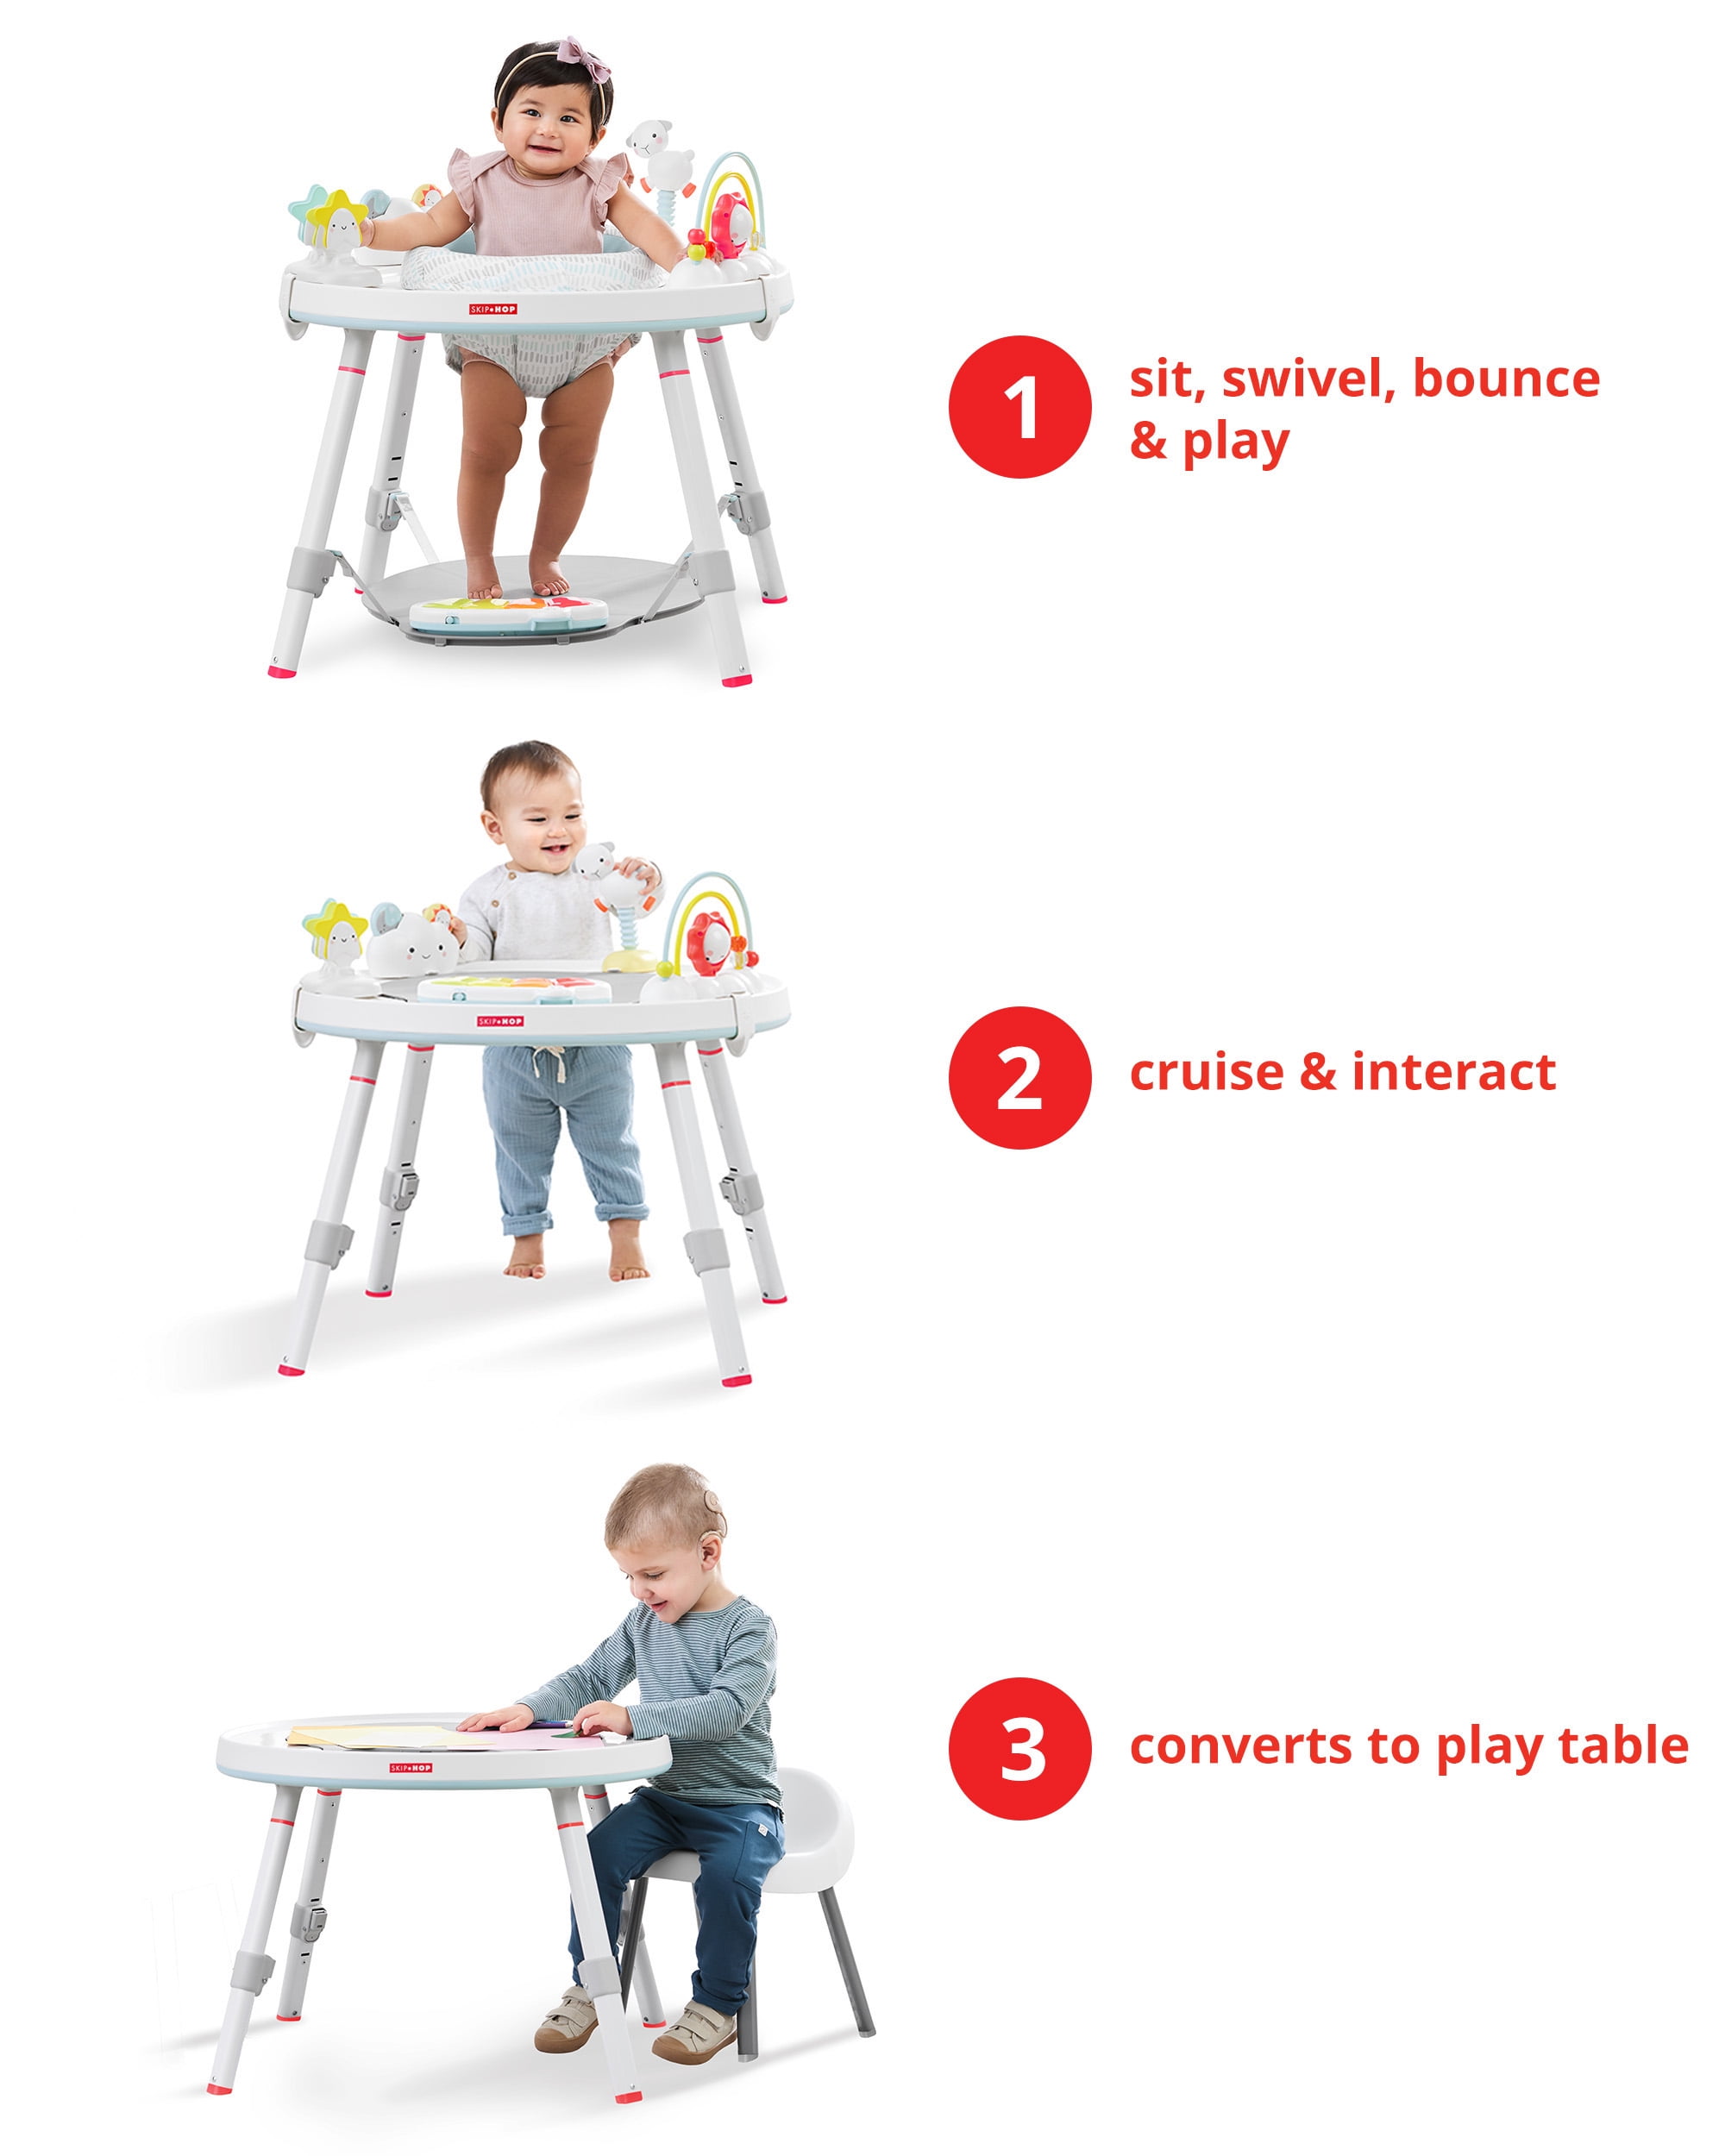 Skip Hop Baby Activity Center: Interactive Play Center with 3-Stage Grow -with-Me Functionality, 4mo+, Silver Lining Cloud 